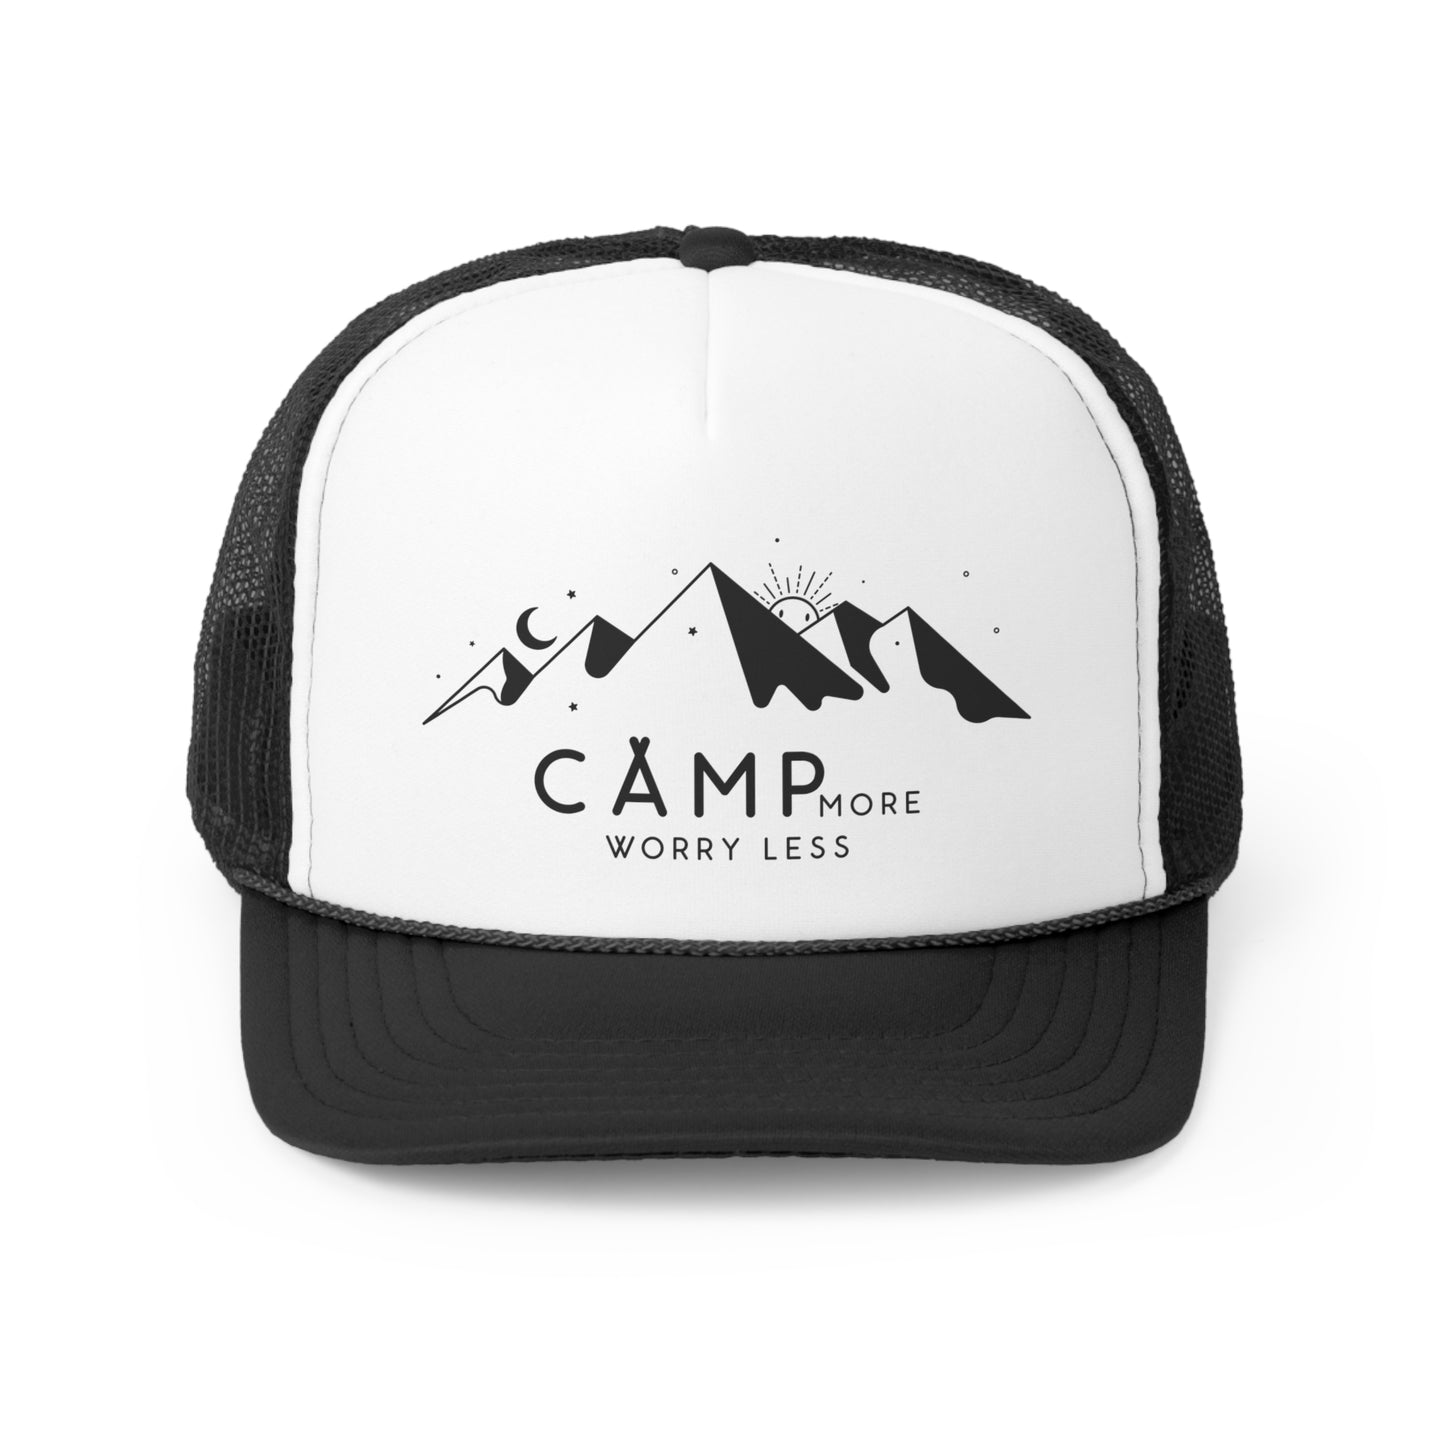 Camp More, Worry Less